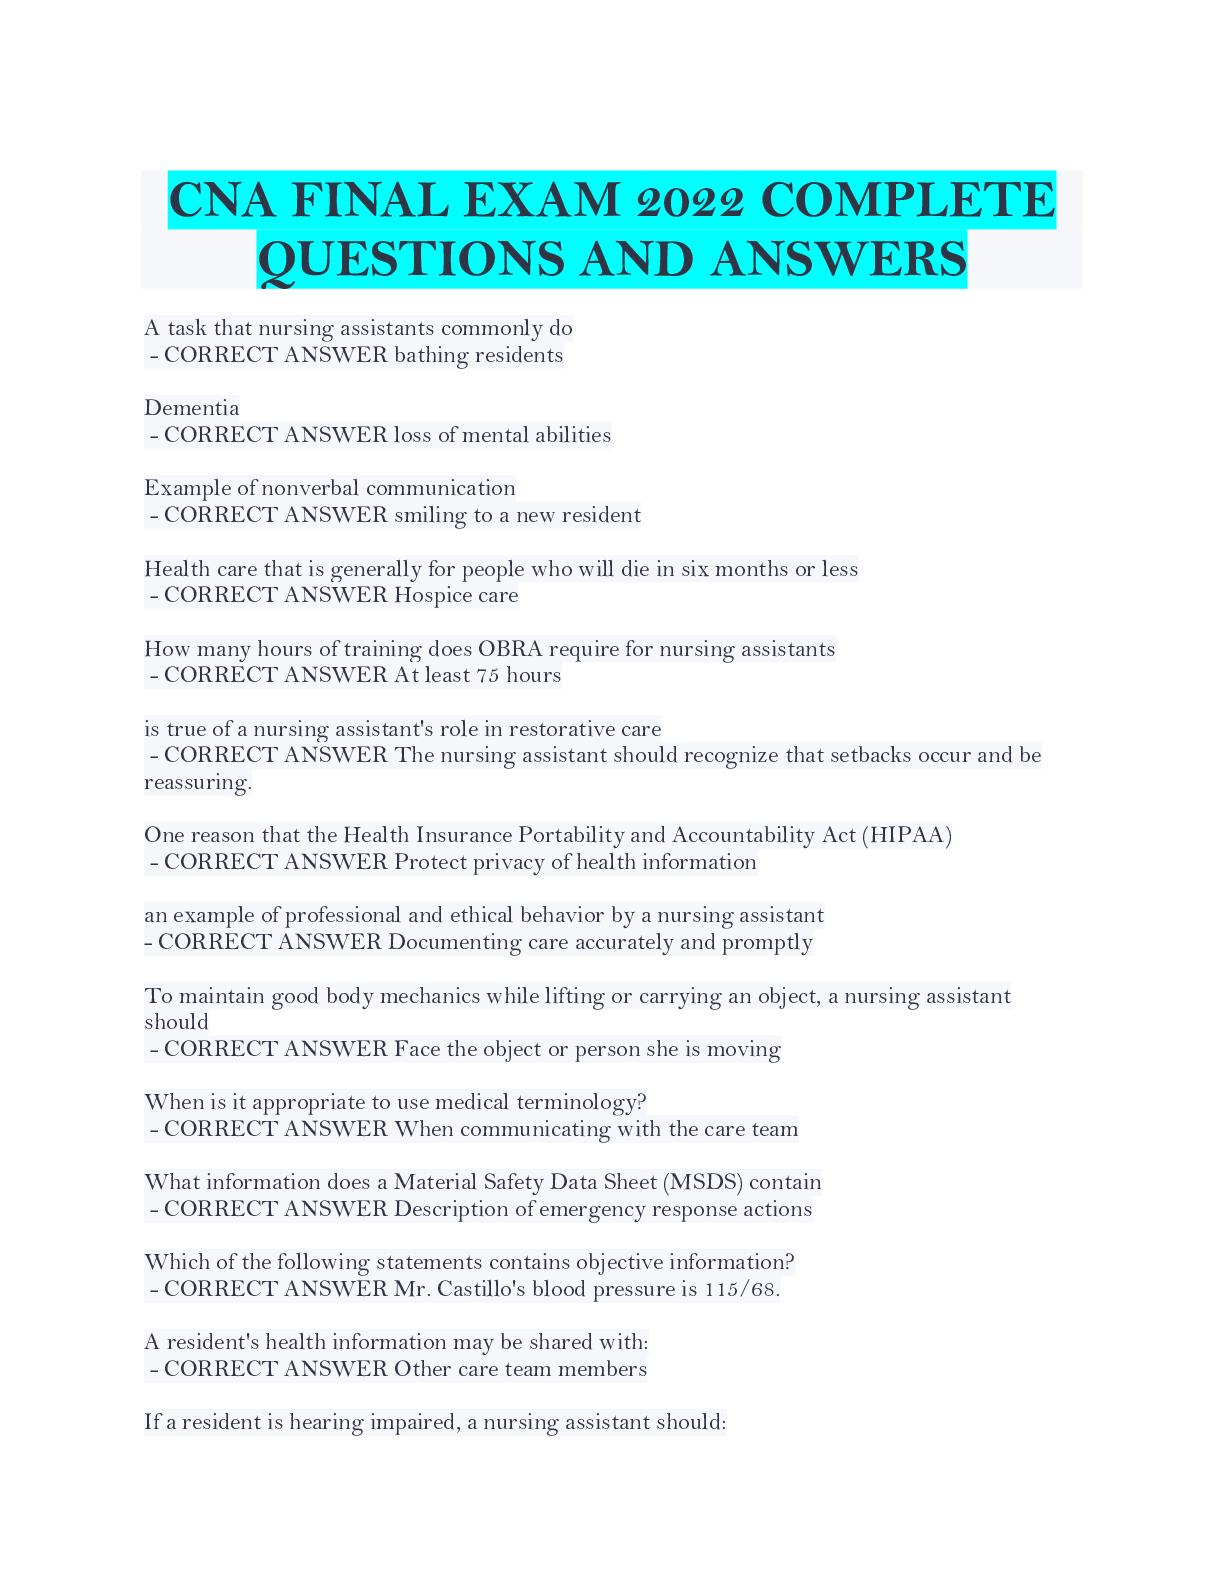 CNA FINAL EXAM 2022 COMPLETE QUESTIONS AND ANSWERS Browsegrades